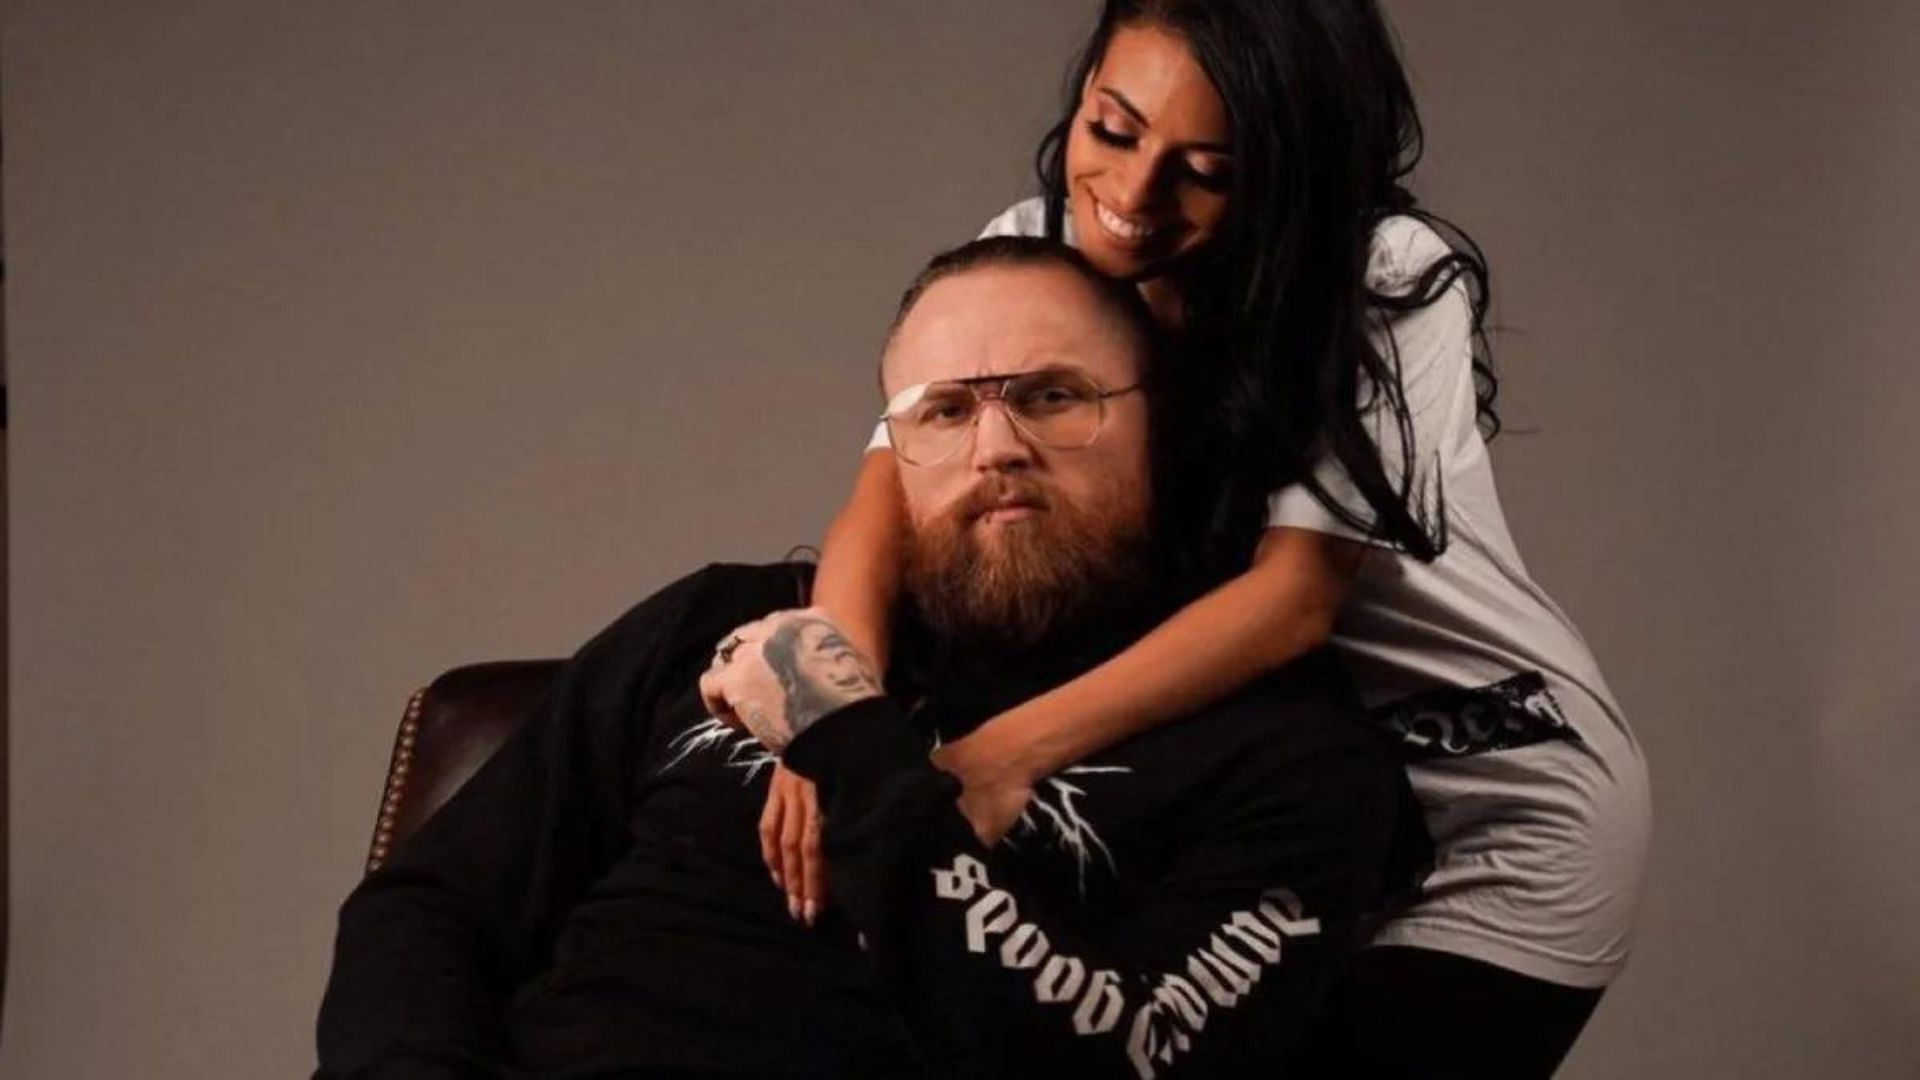 Malakai Black and Zelina Vega are married to each other